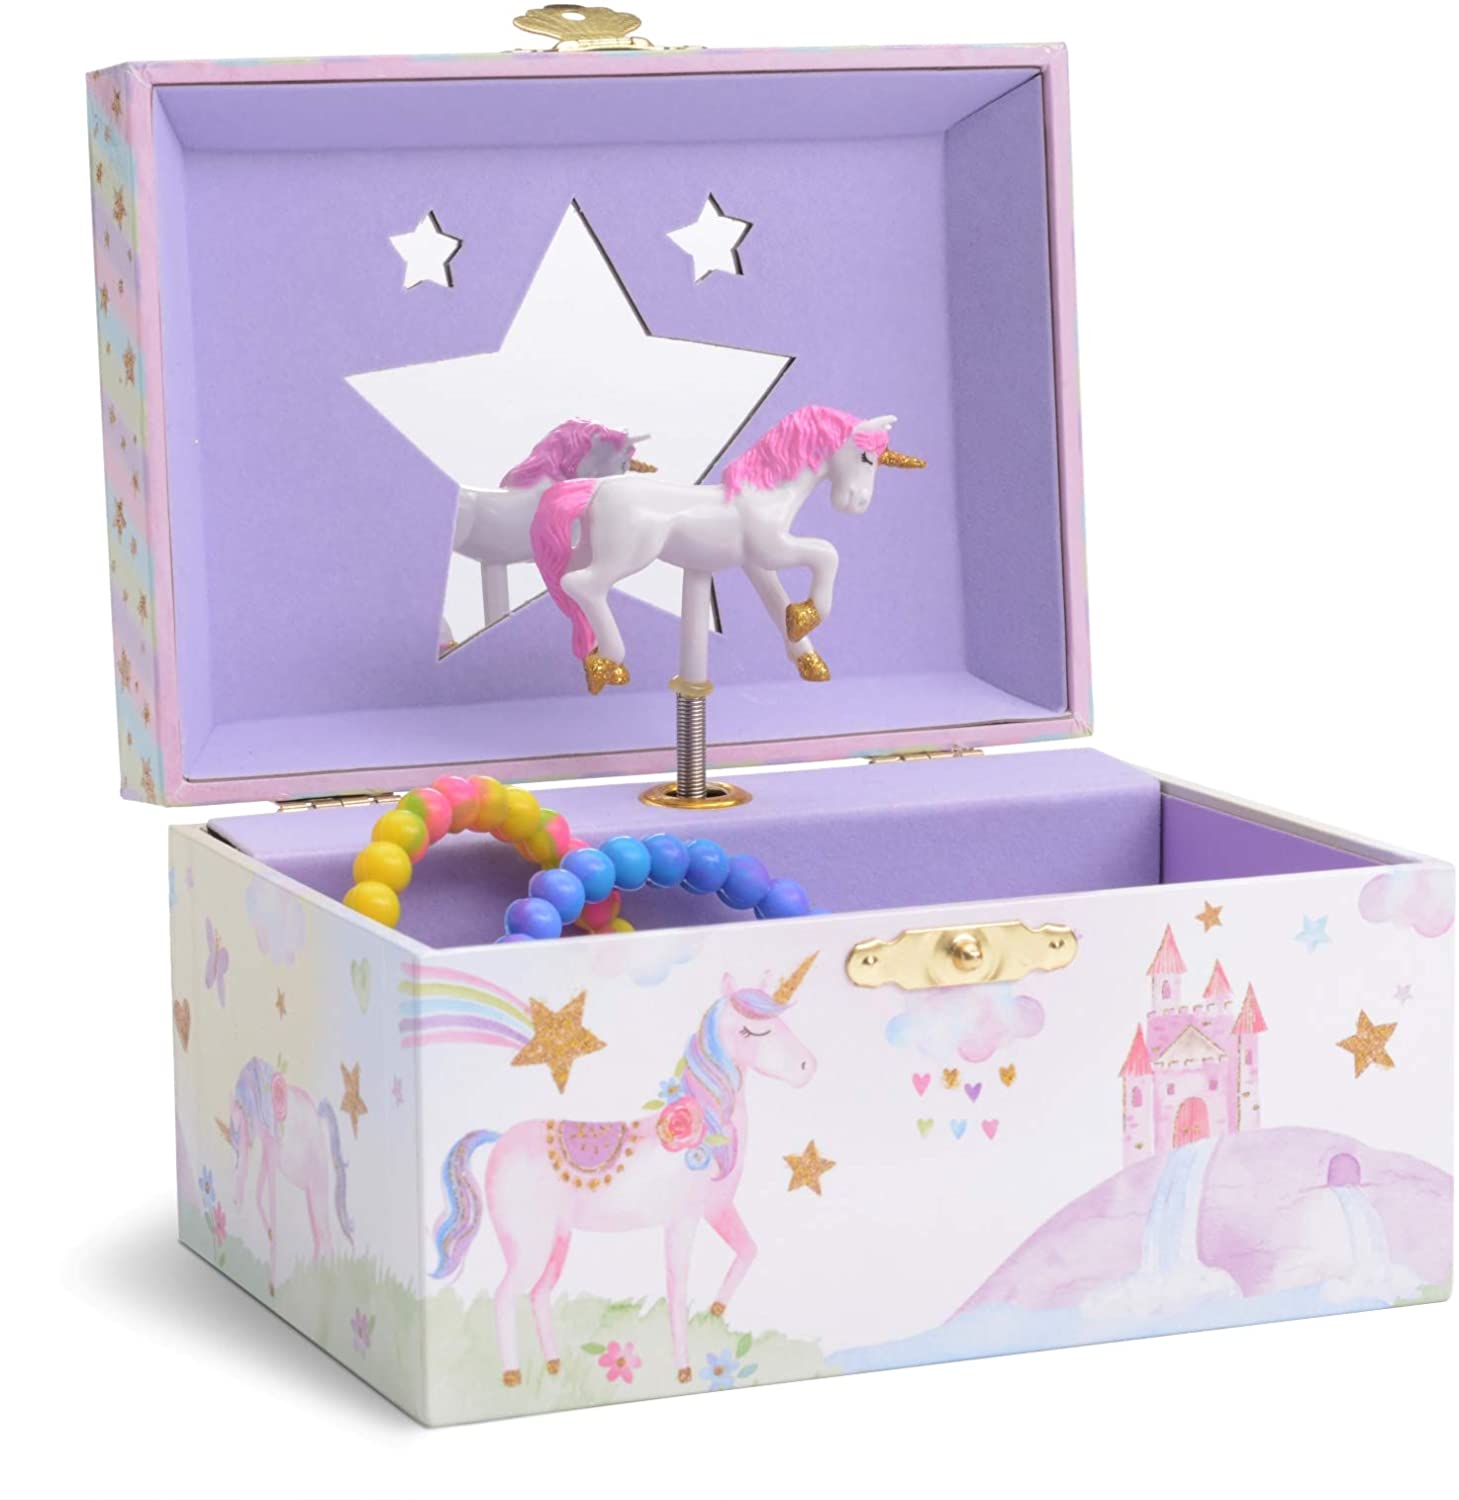 Jewelkeeper Magical Jewelry Box 5-Year-Old Girl’s Gifts